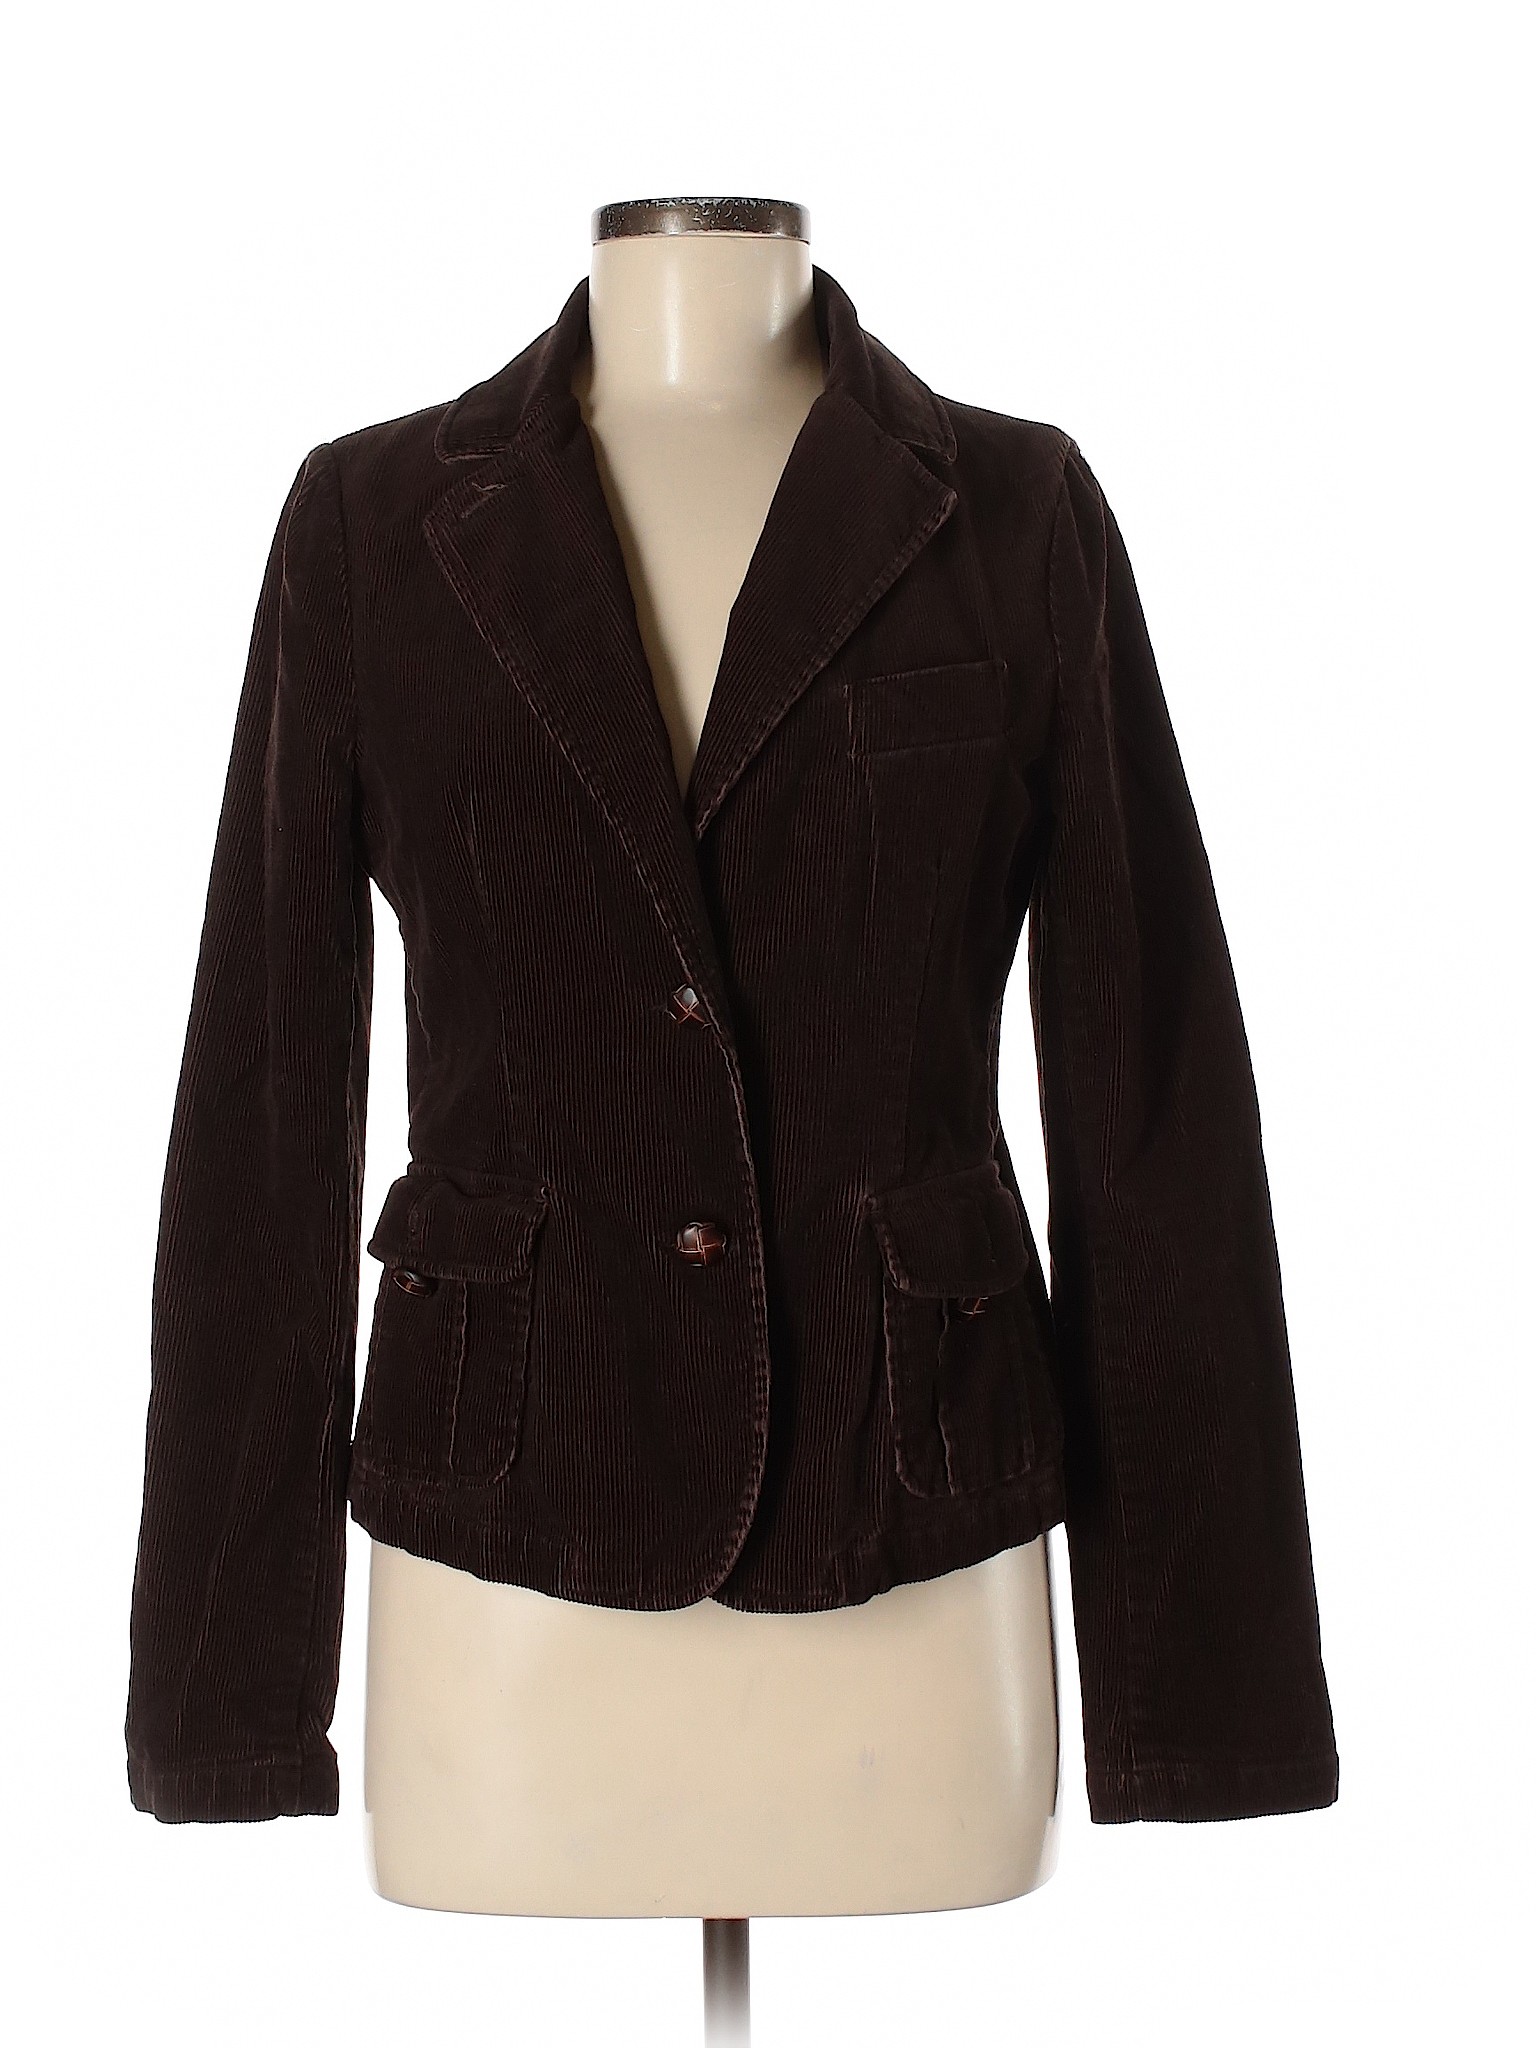 American Eagle Outfitters Women Brown Jacket M | eBay